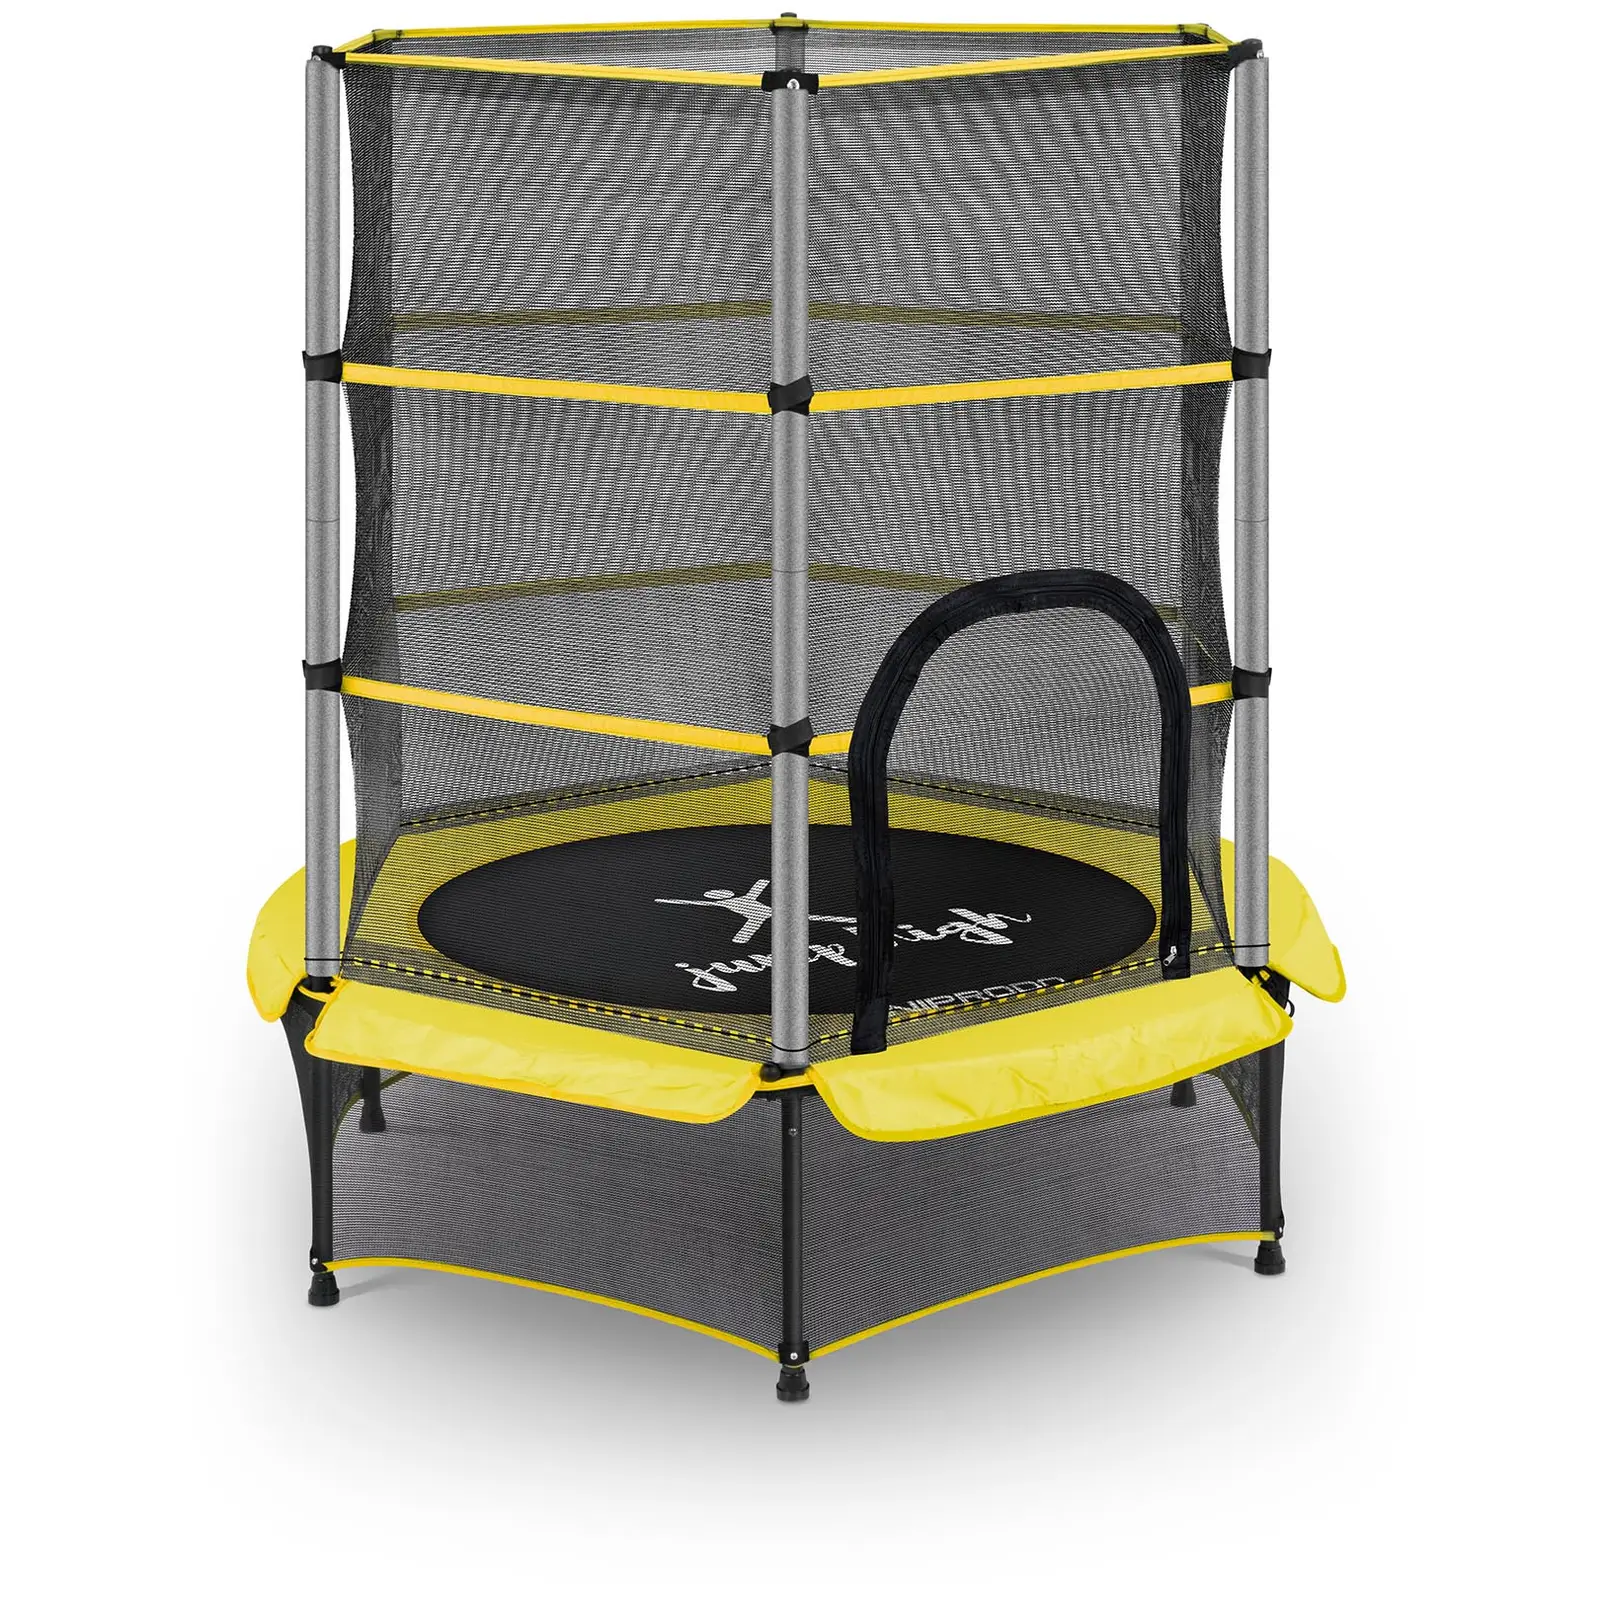 Kid's Trampoline - with safety net - 140 cm - 50 kg - yellow